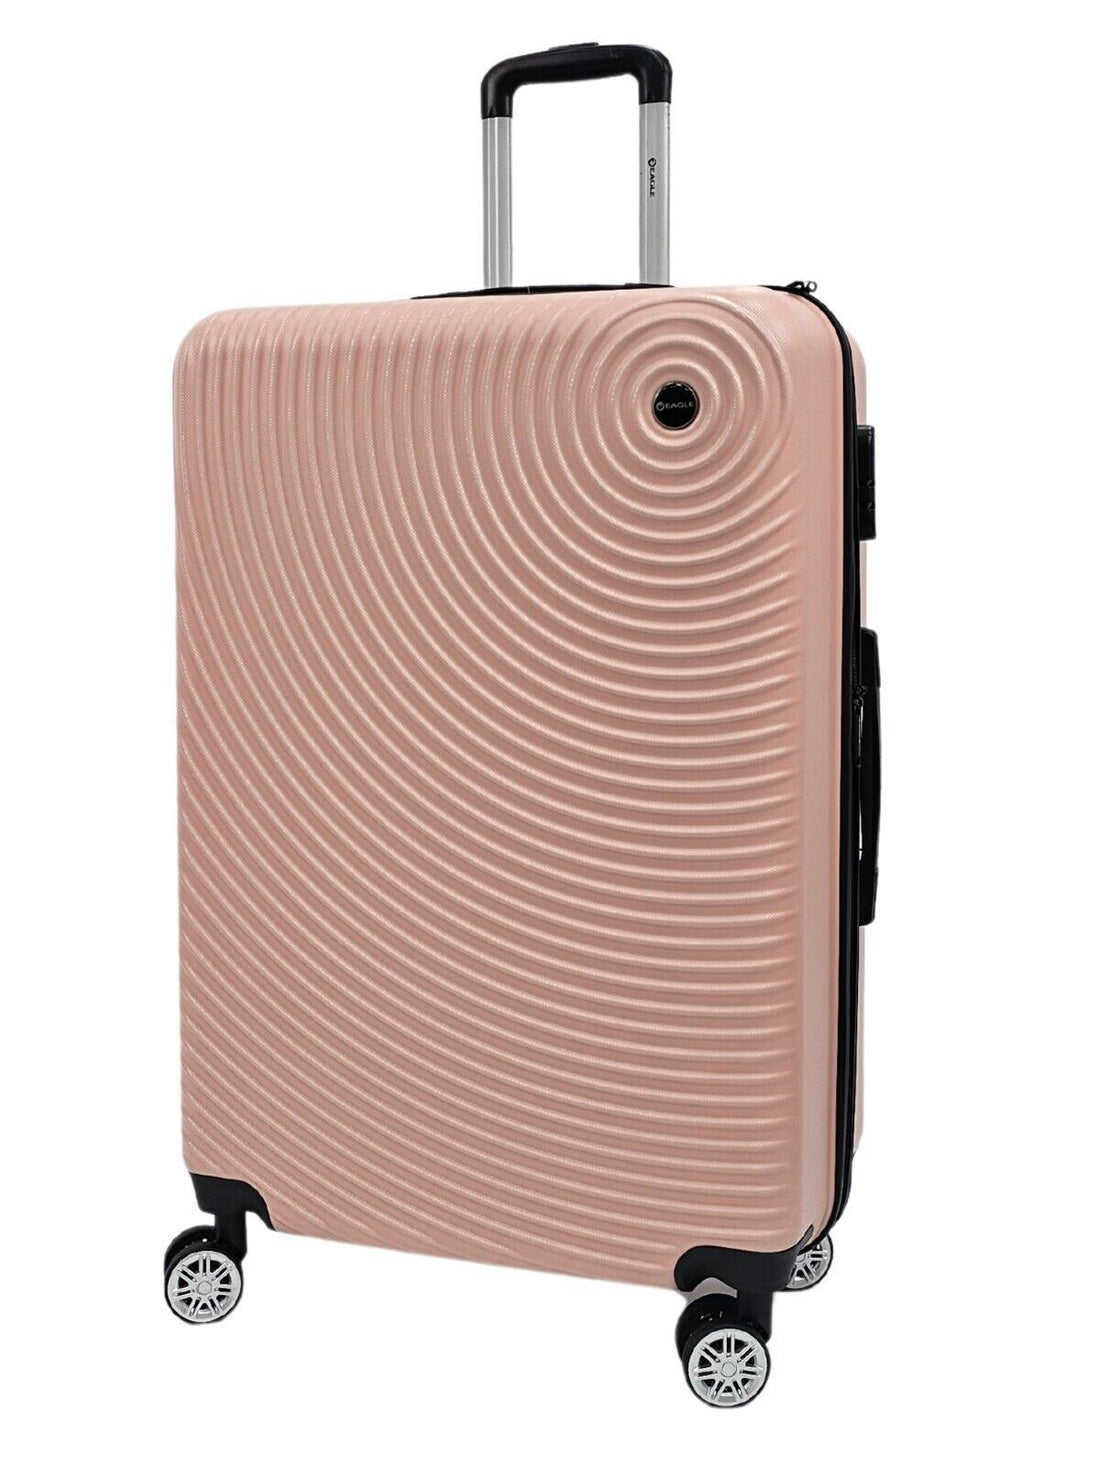 Hard Shell Rose Gold Cabin Suitcase Set 8 Wheel Luggage Case Travel Bag - Upperclass Fashions 